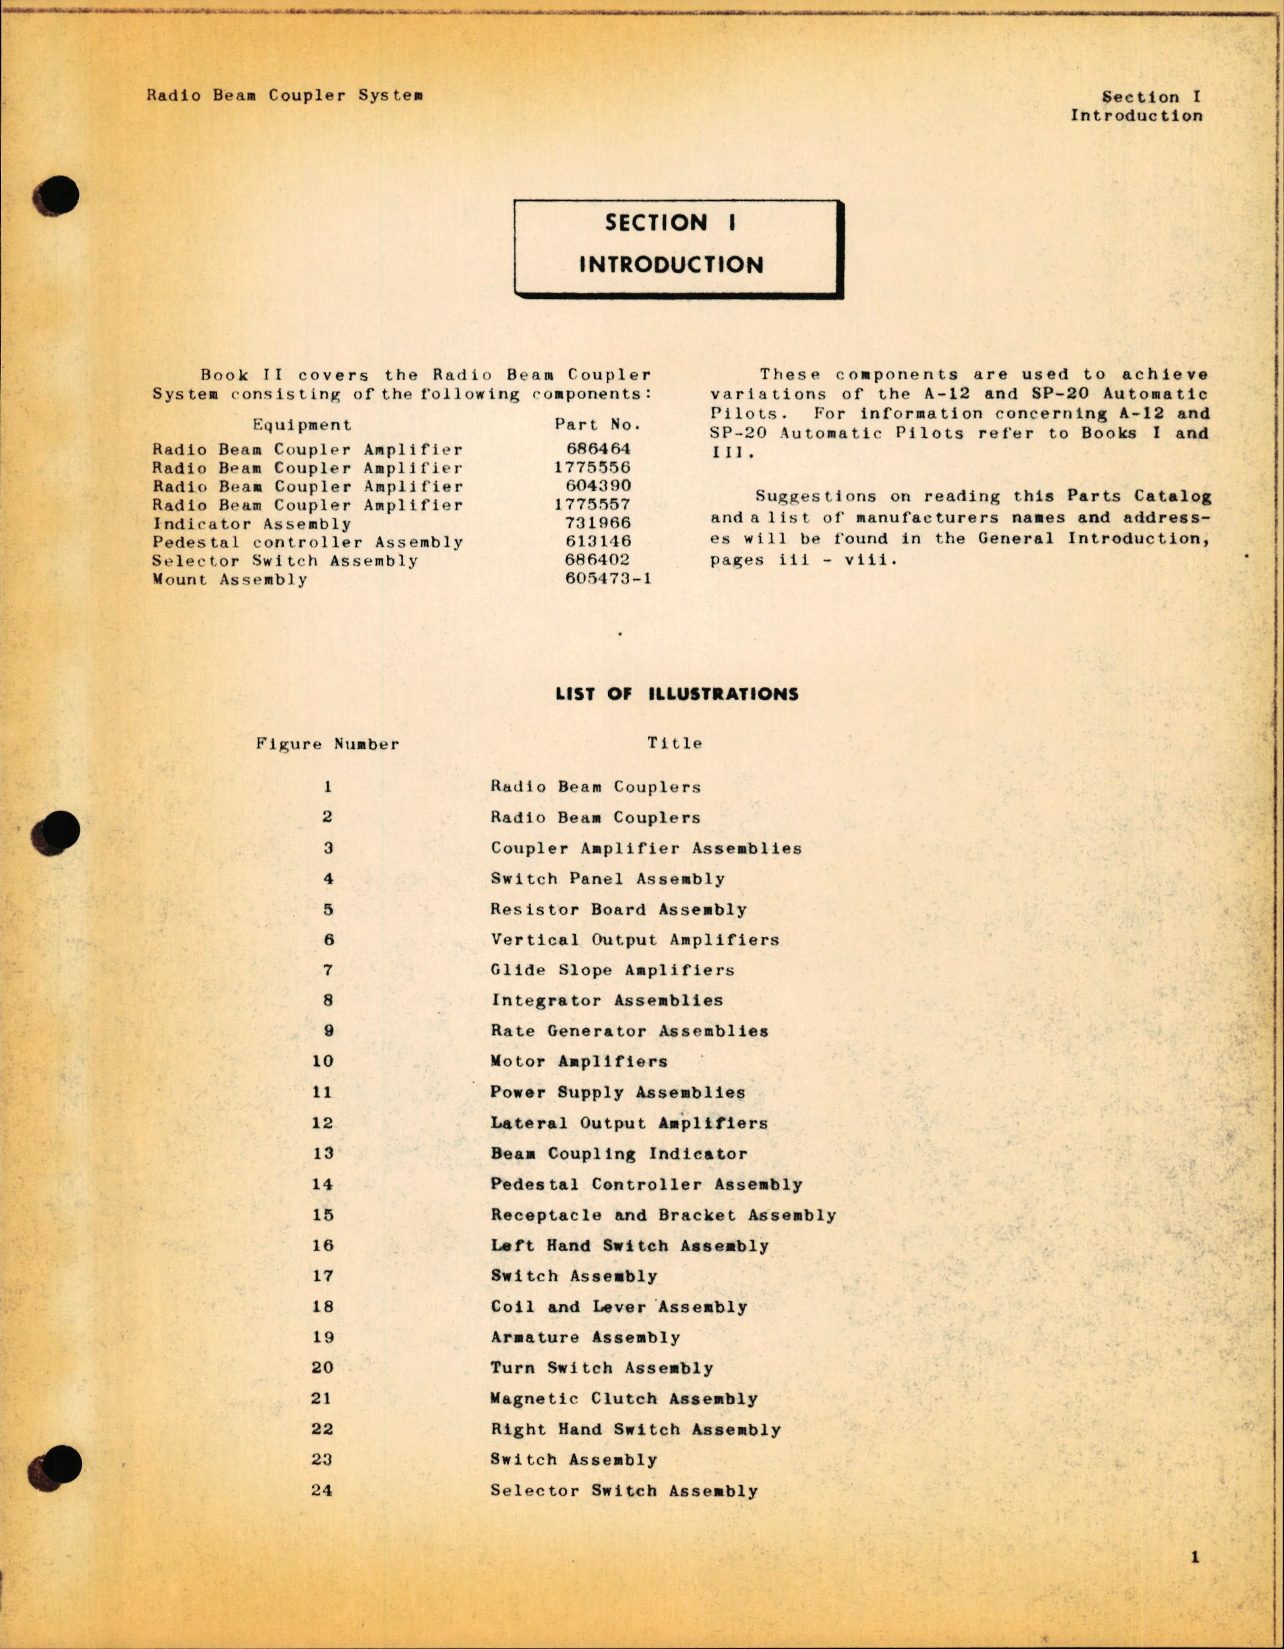 Sample page 2 from AirCorps Library document: Radio Beam Coupler System, Sperry Book II